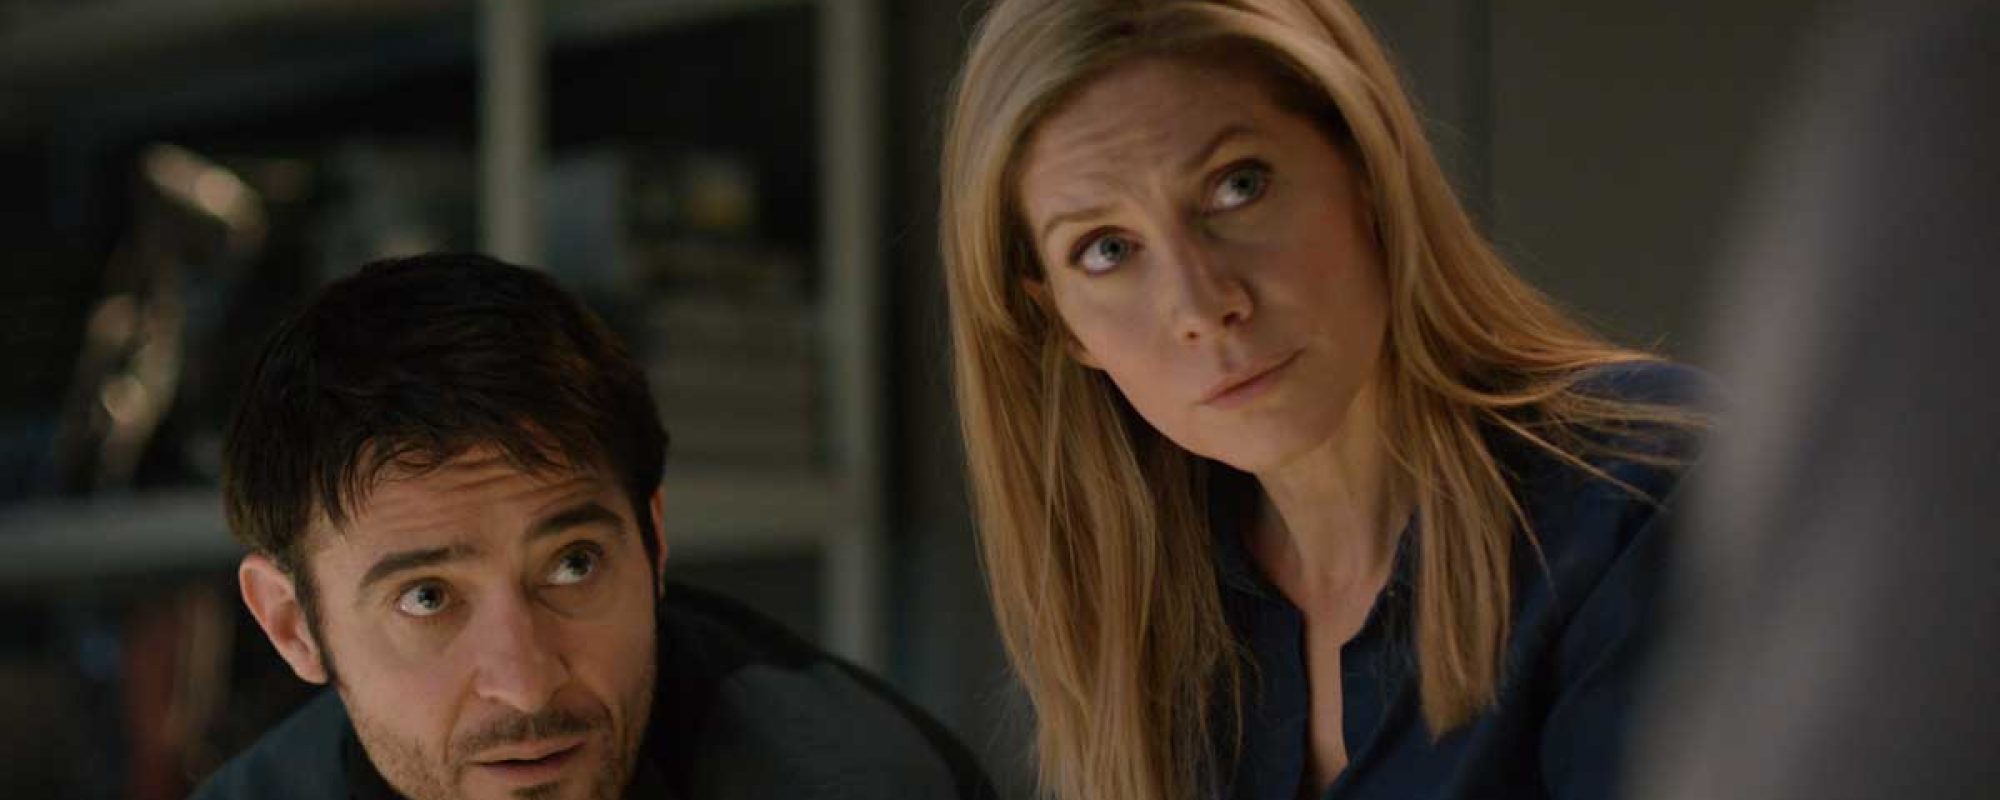 ELIZABETH MITCHELL AND GORAN VISNJIC JOIN DONALD SUTHERLAND IN U.S. TELEVISION PREMIERE OF CROSSING LINES SEASON THREE ON OVATION TV